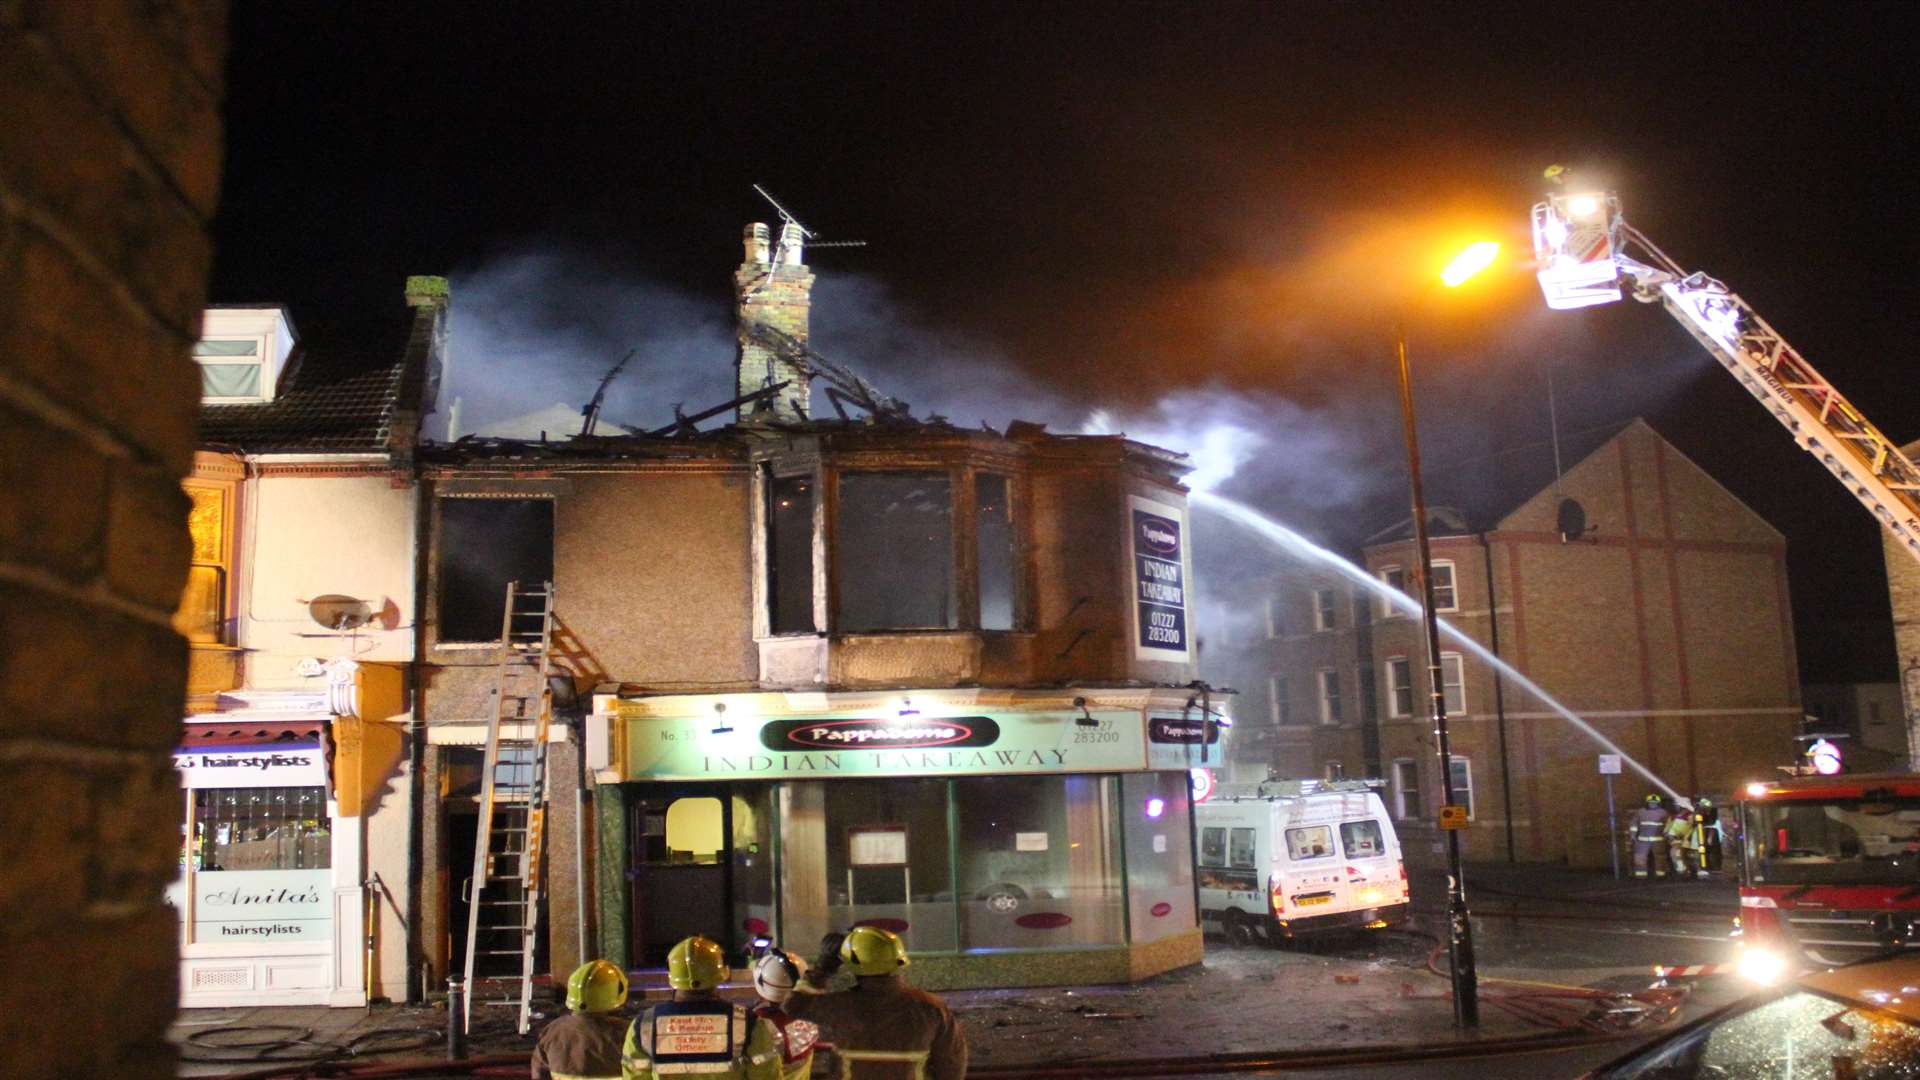 The building was seriously damaged. Picture: Phillip Royles